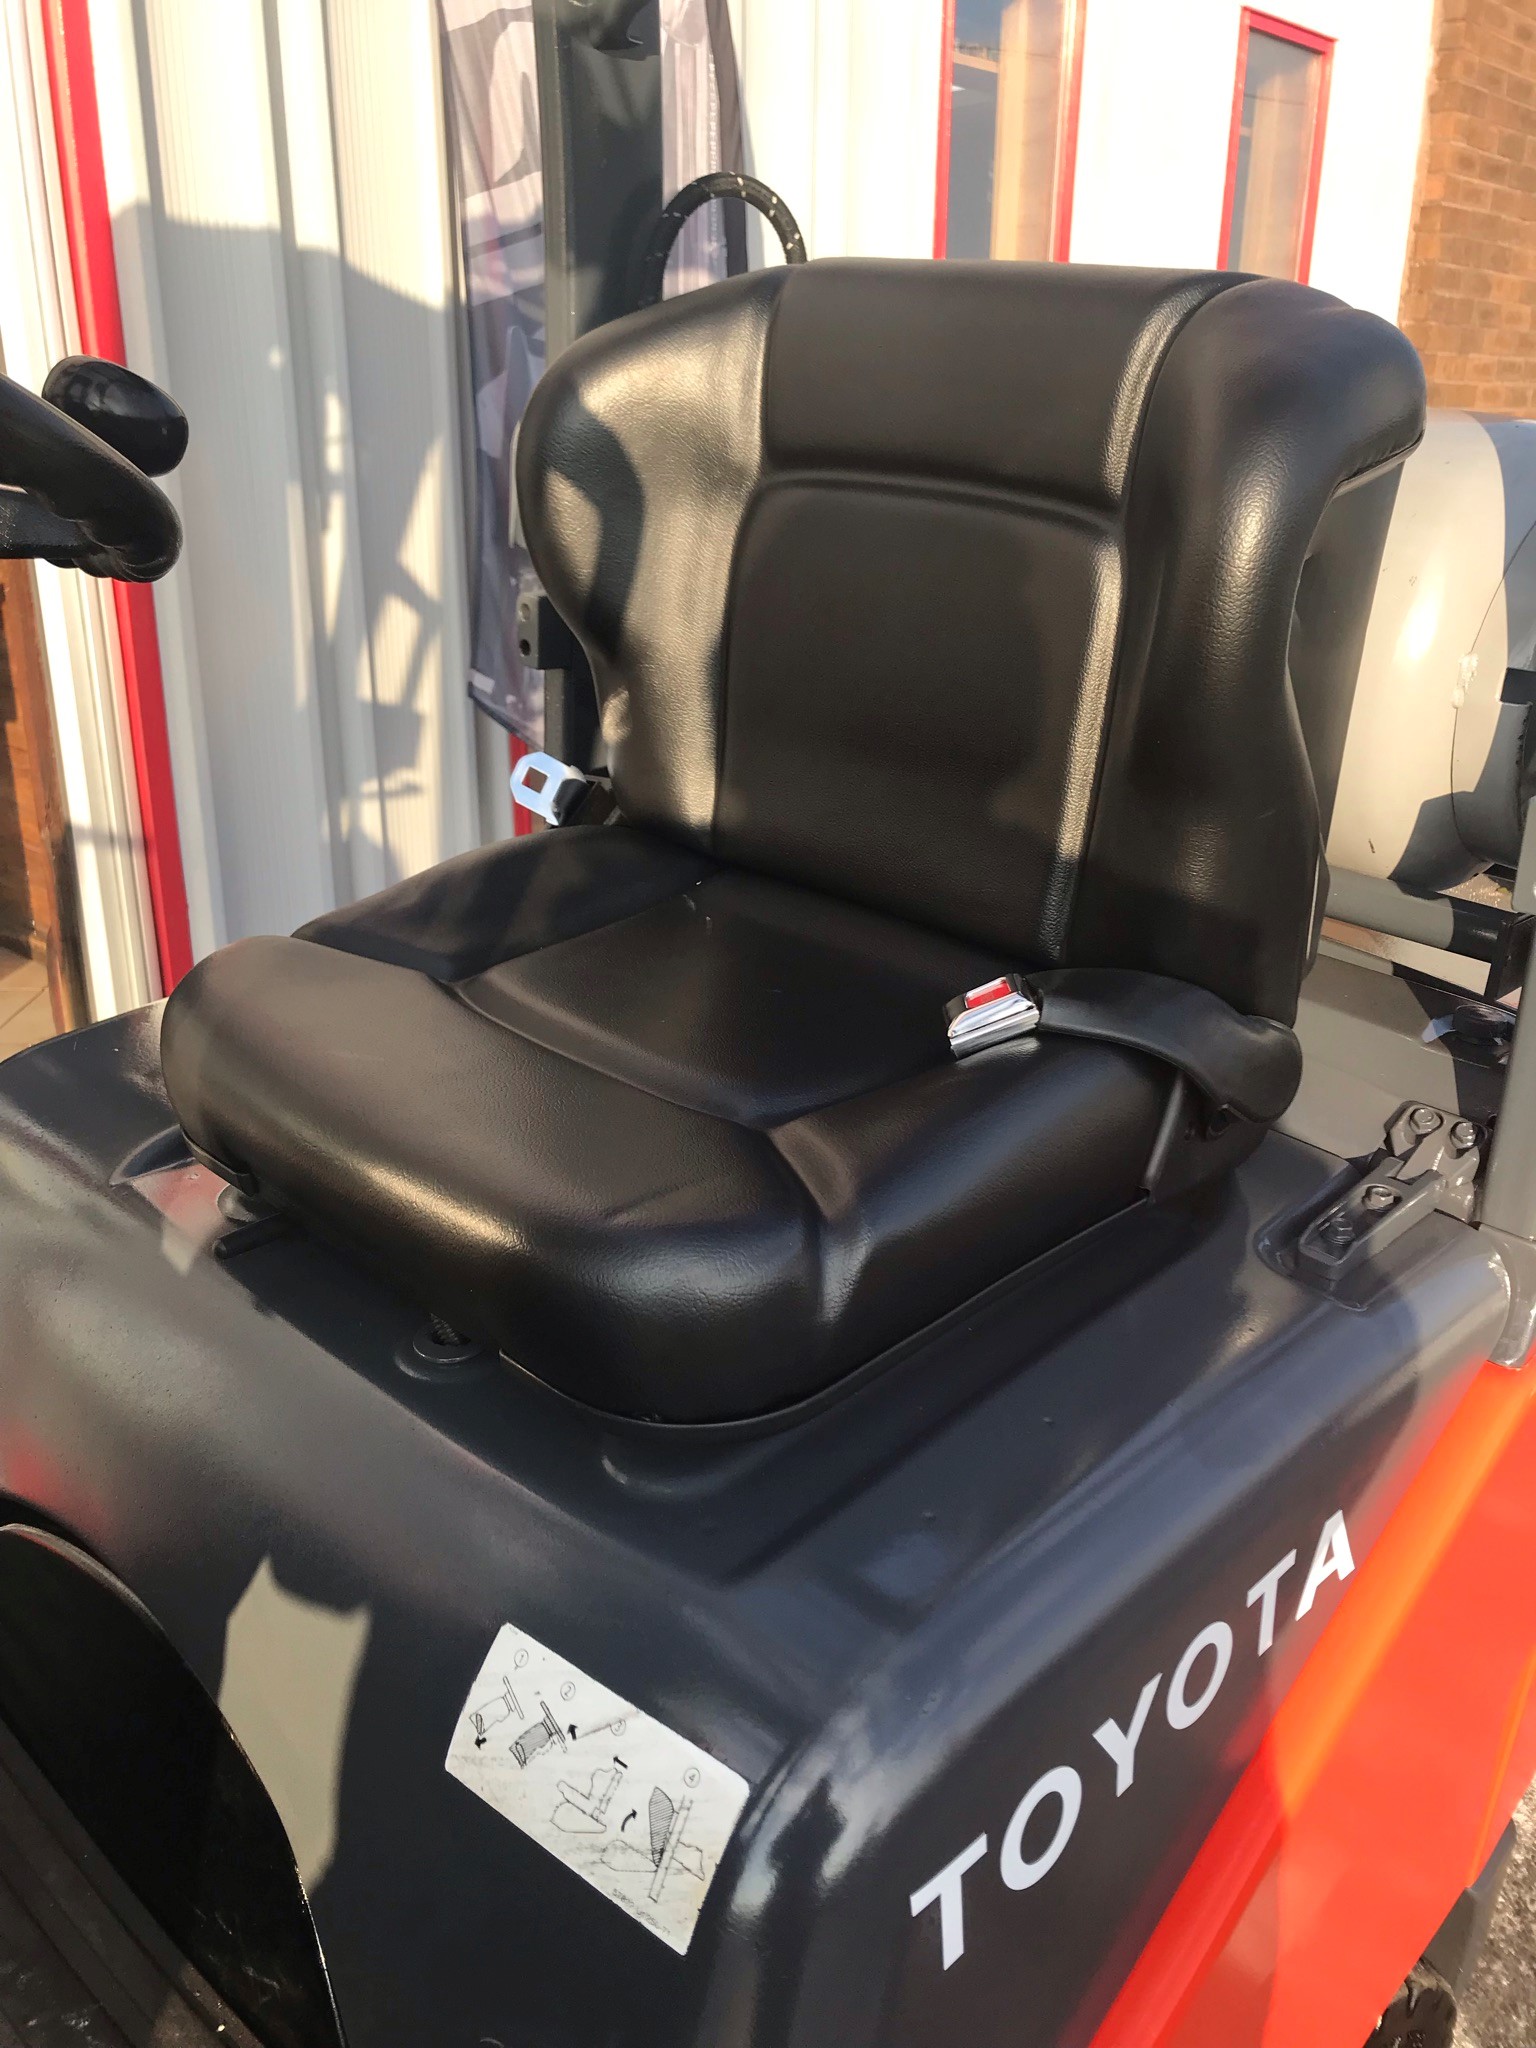 Power steering 2011 red toyota forklift for sale